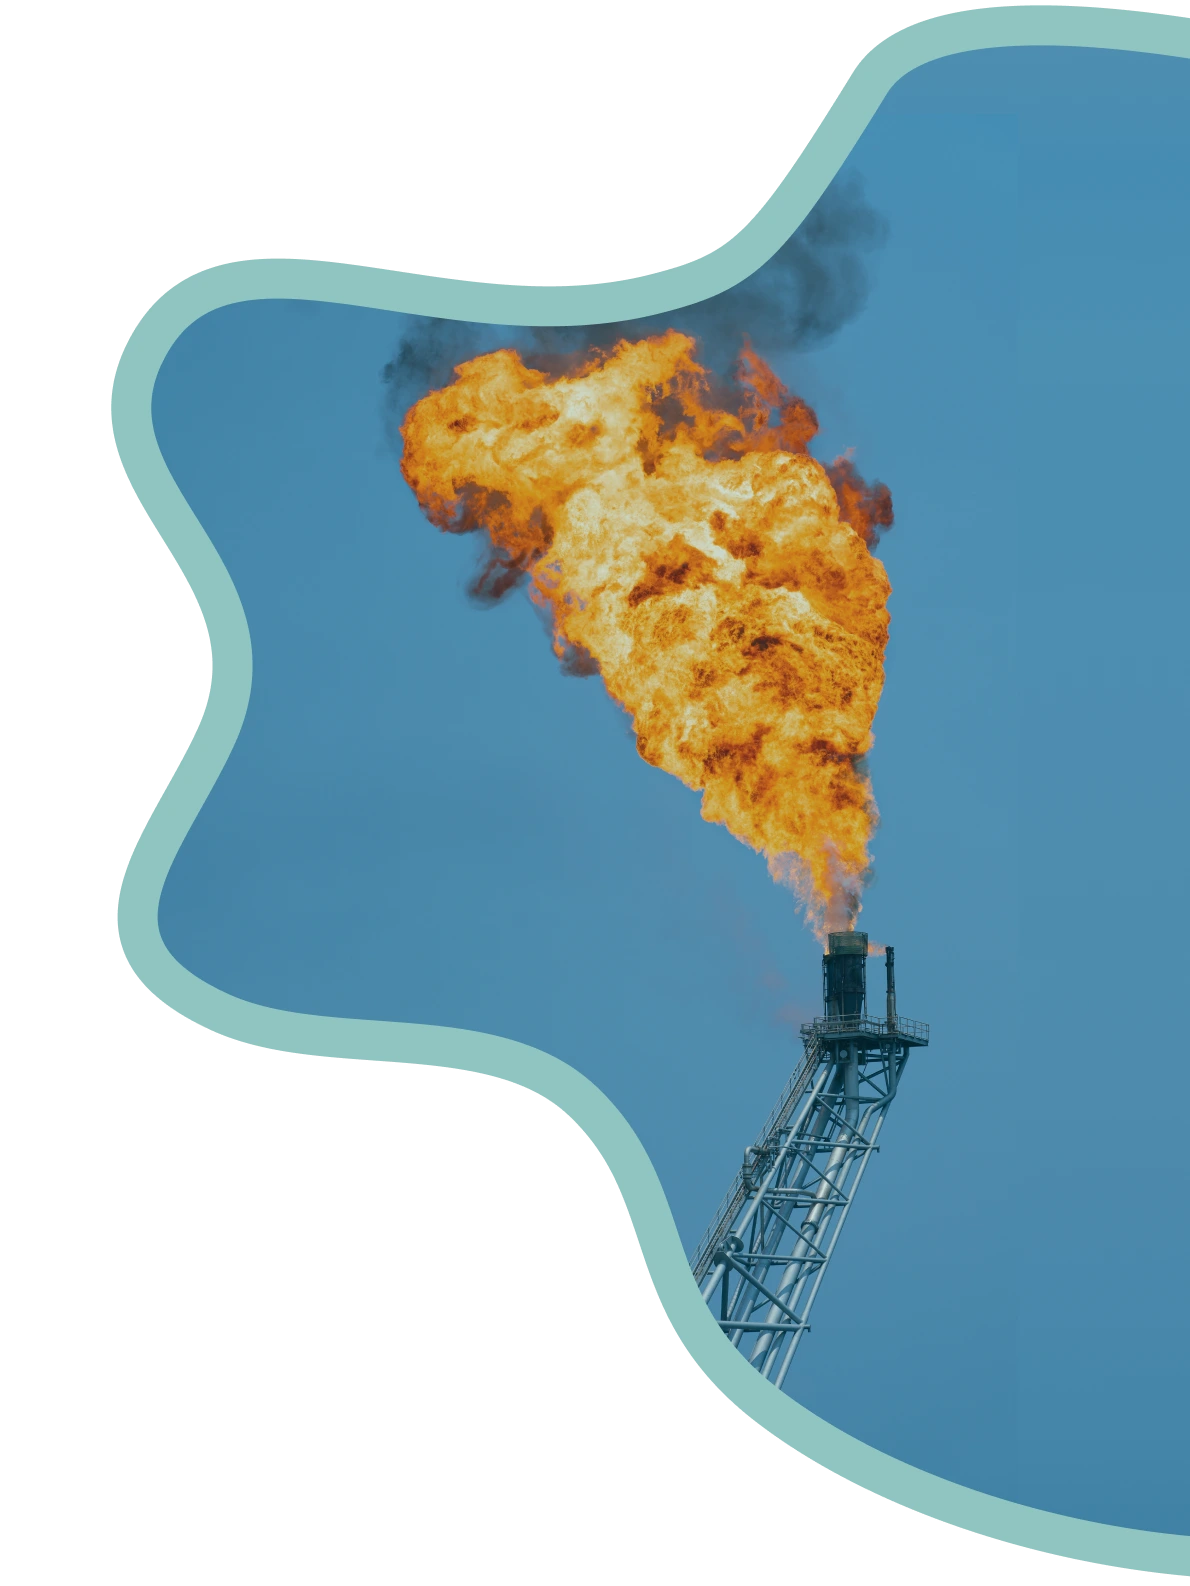 Custom Software Development Services for the Oil and Gas Industry